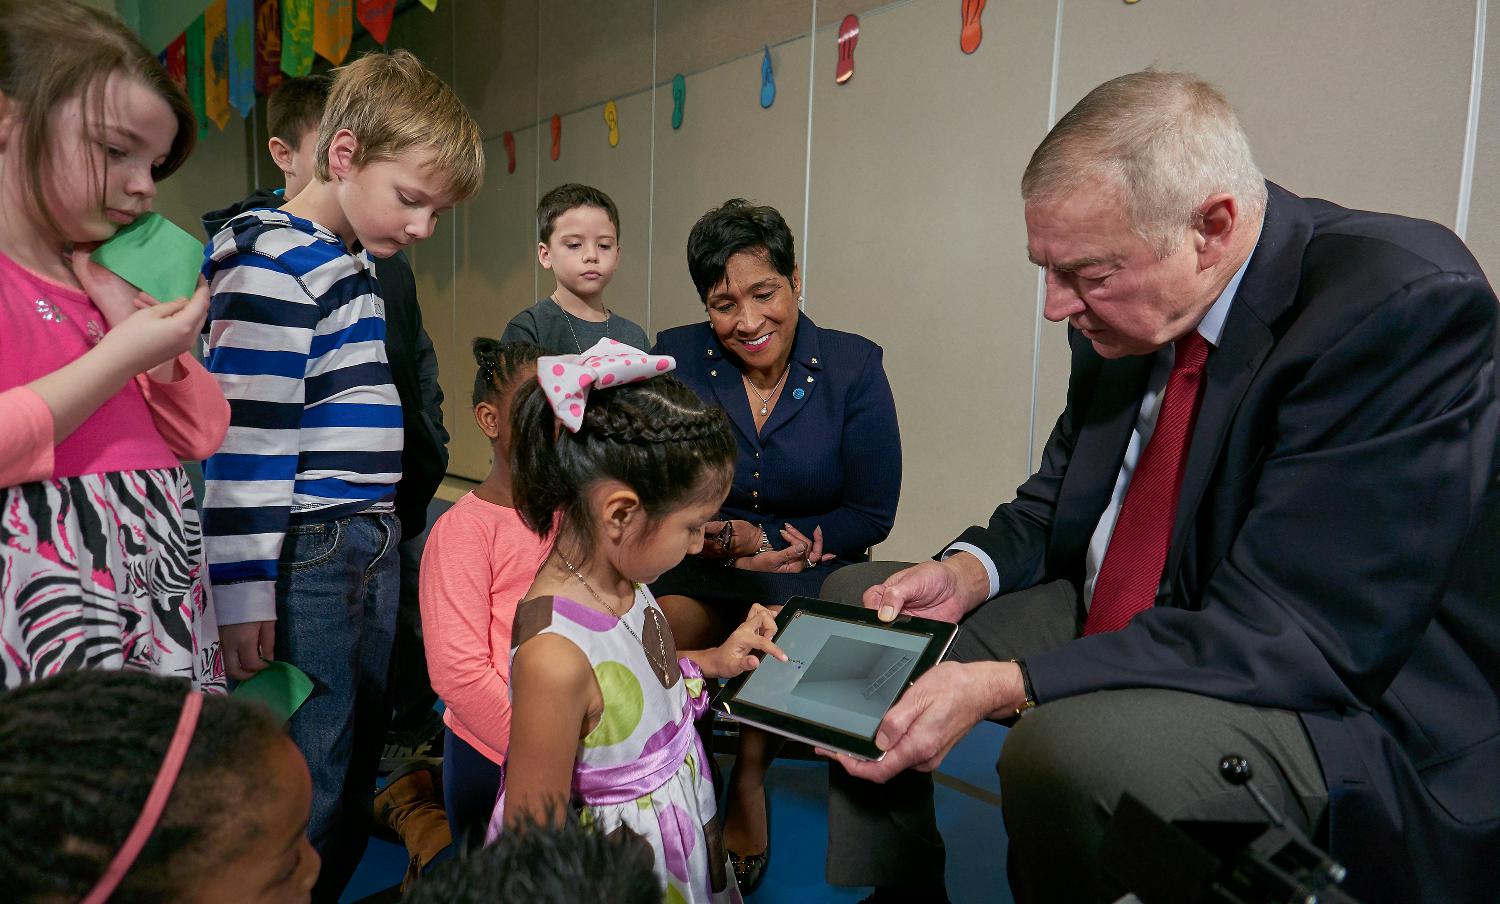 SAS CEO Jim Goodnight has made education the company’s primary philanthropic focus for almost 30 years.